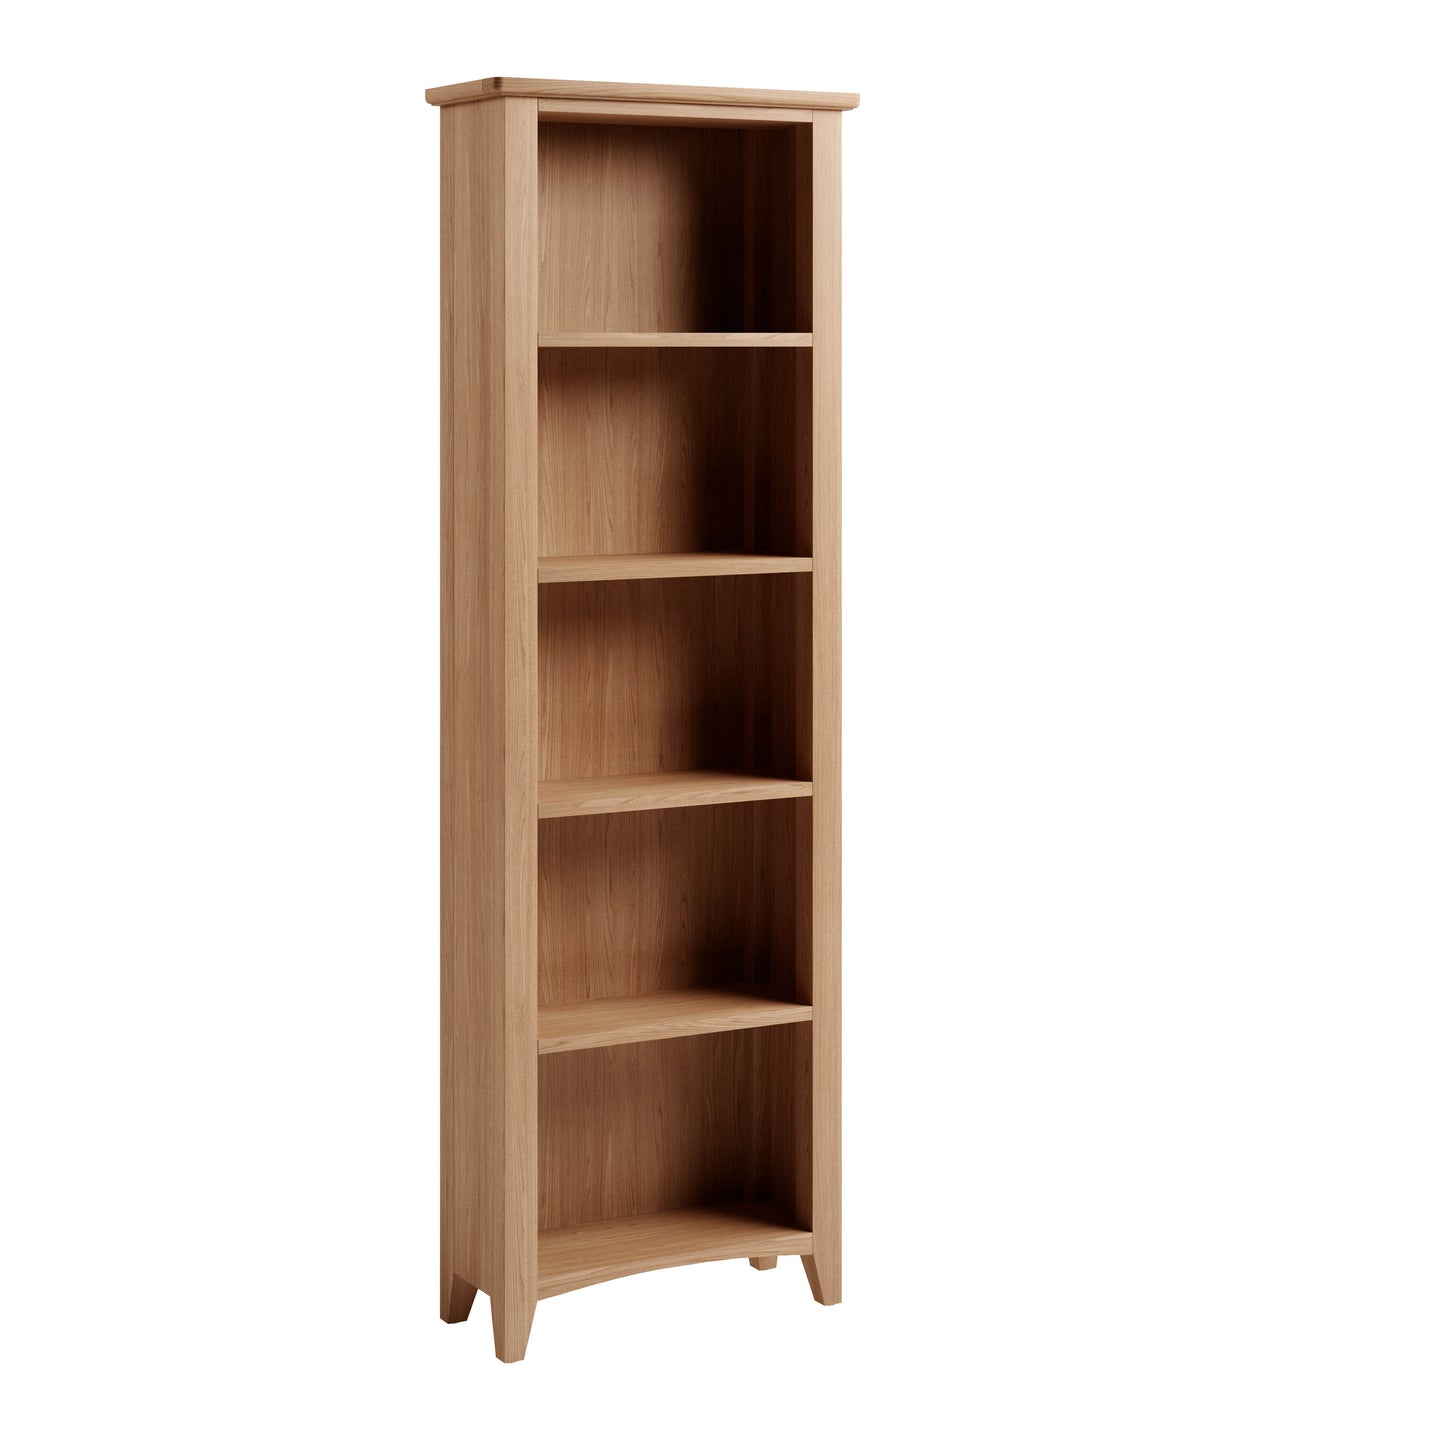 Manor Collection Woodstock Large Bookcase